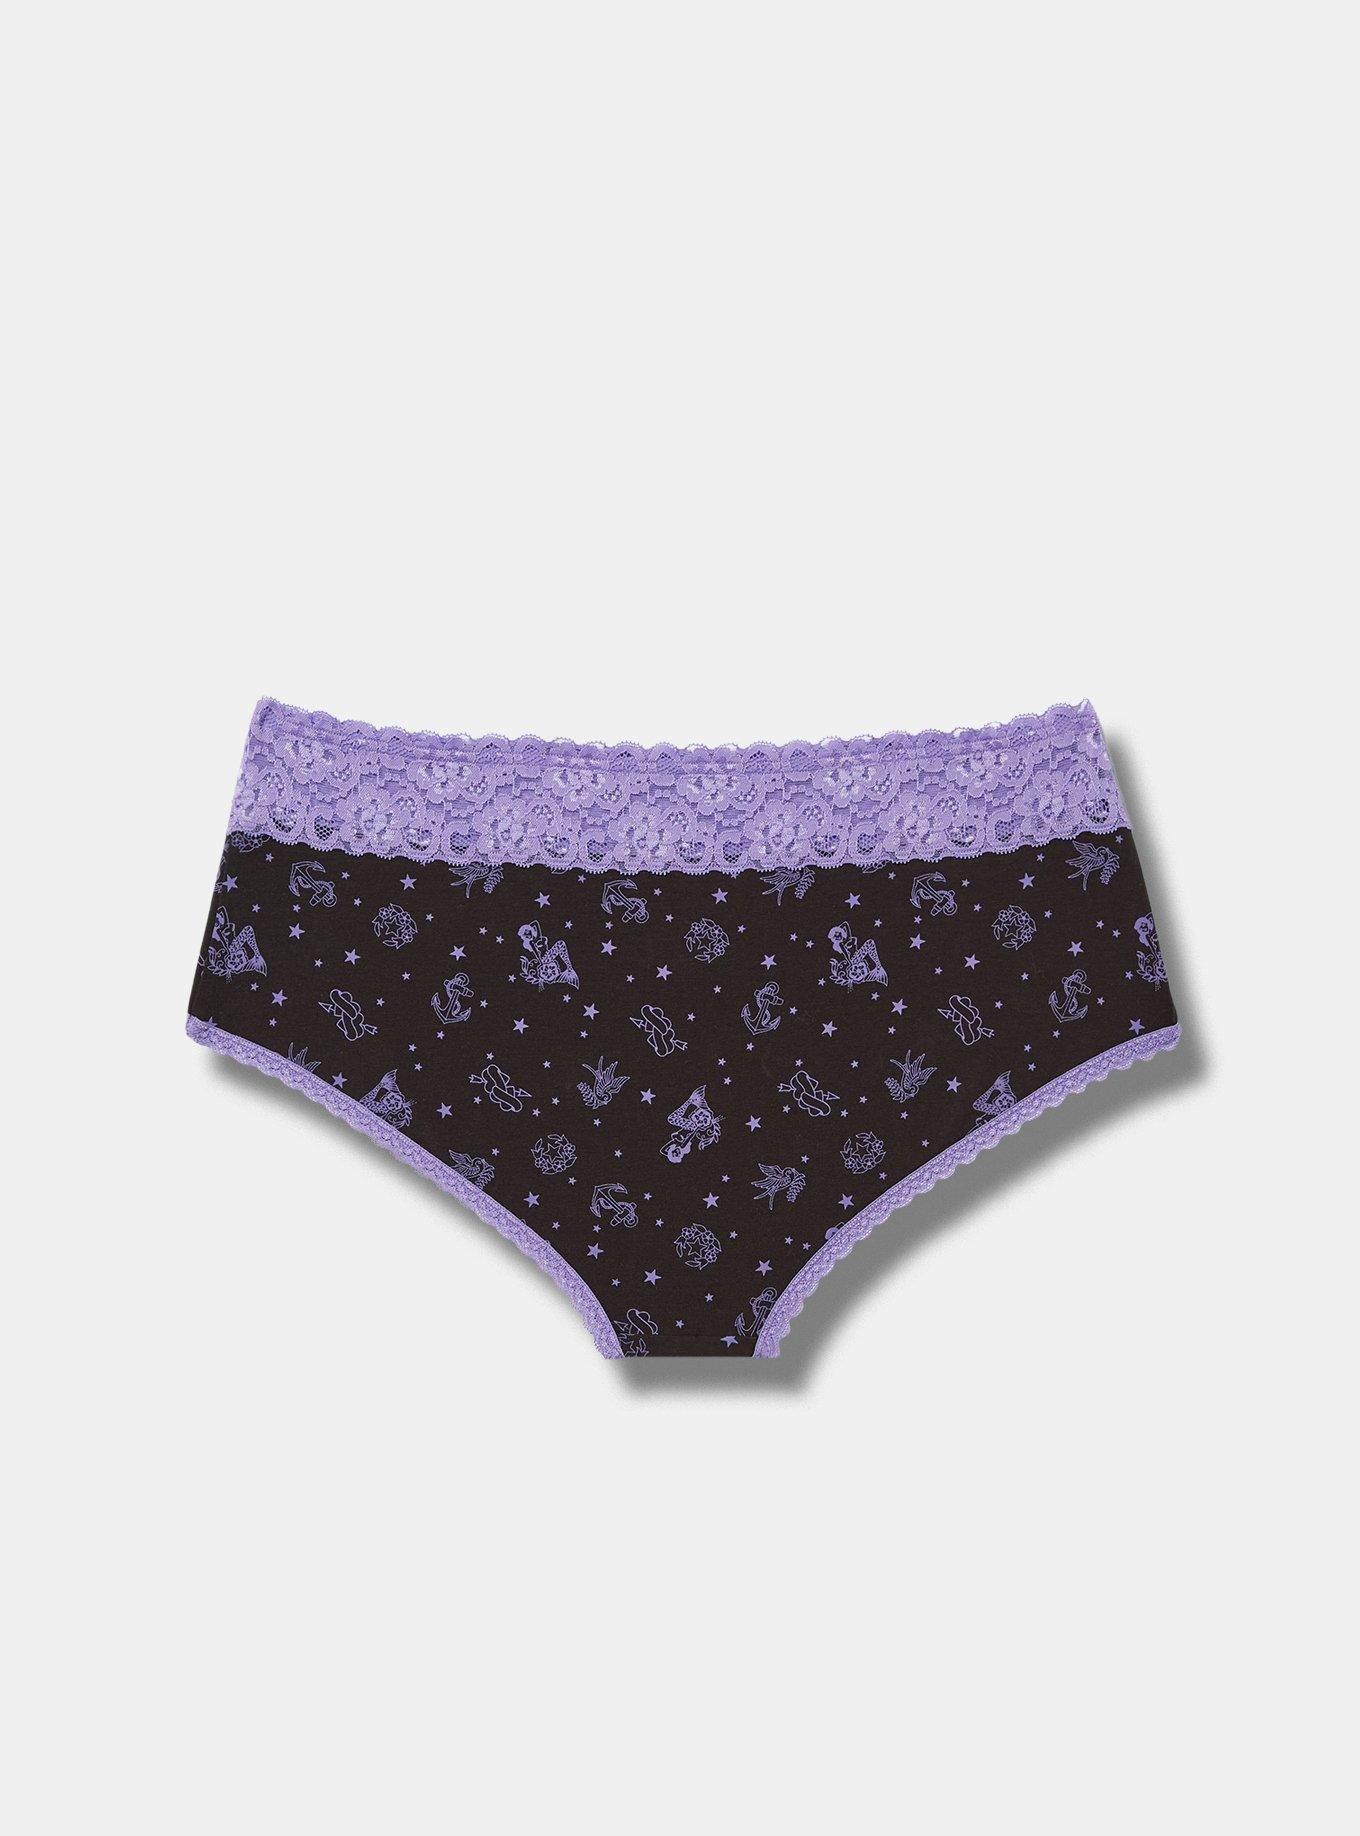 Cotton Rich Knickers Underwear - The Egyptian Cotton